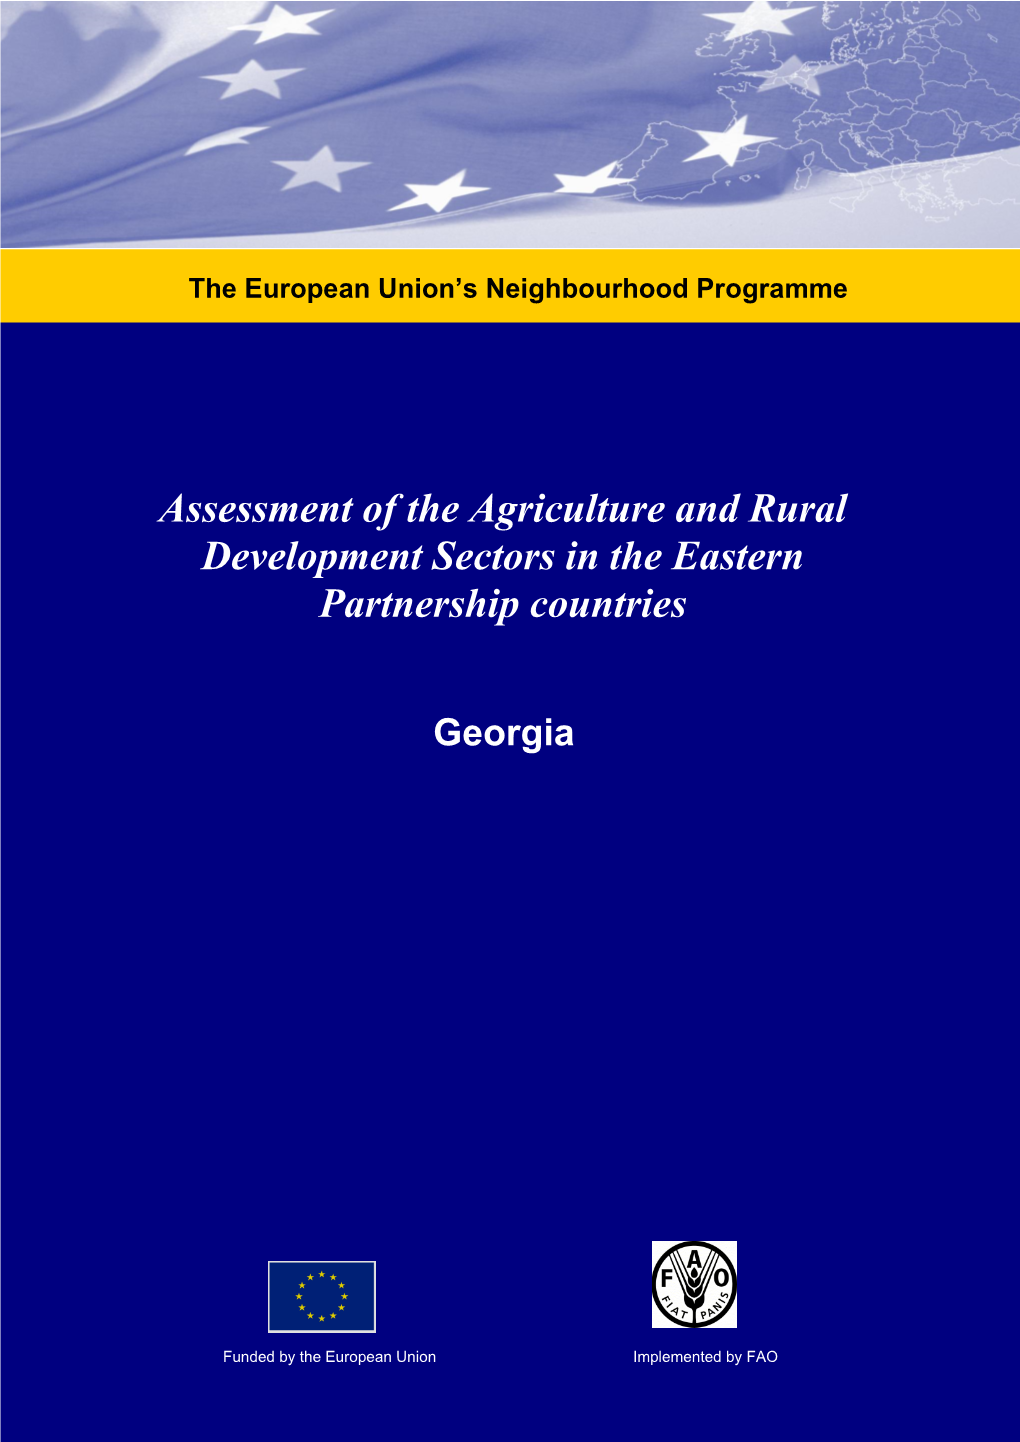 Assessment of the Agriculture and Rural Development Sectors in the Eastern Partnership Countries